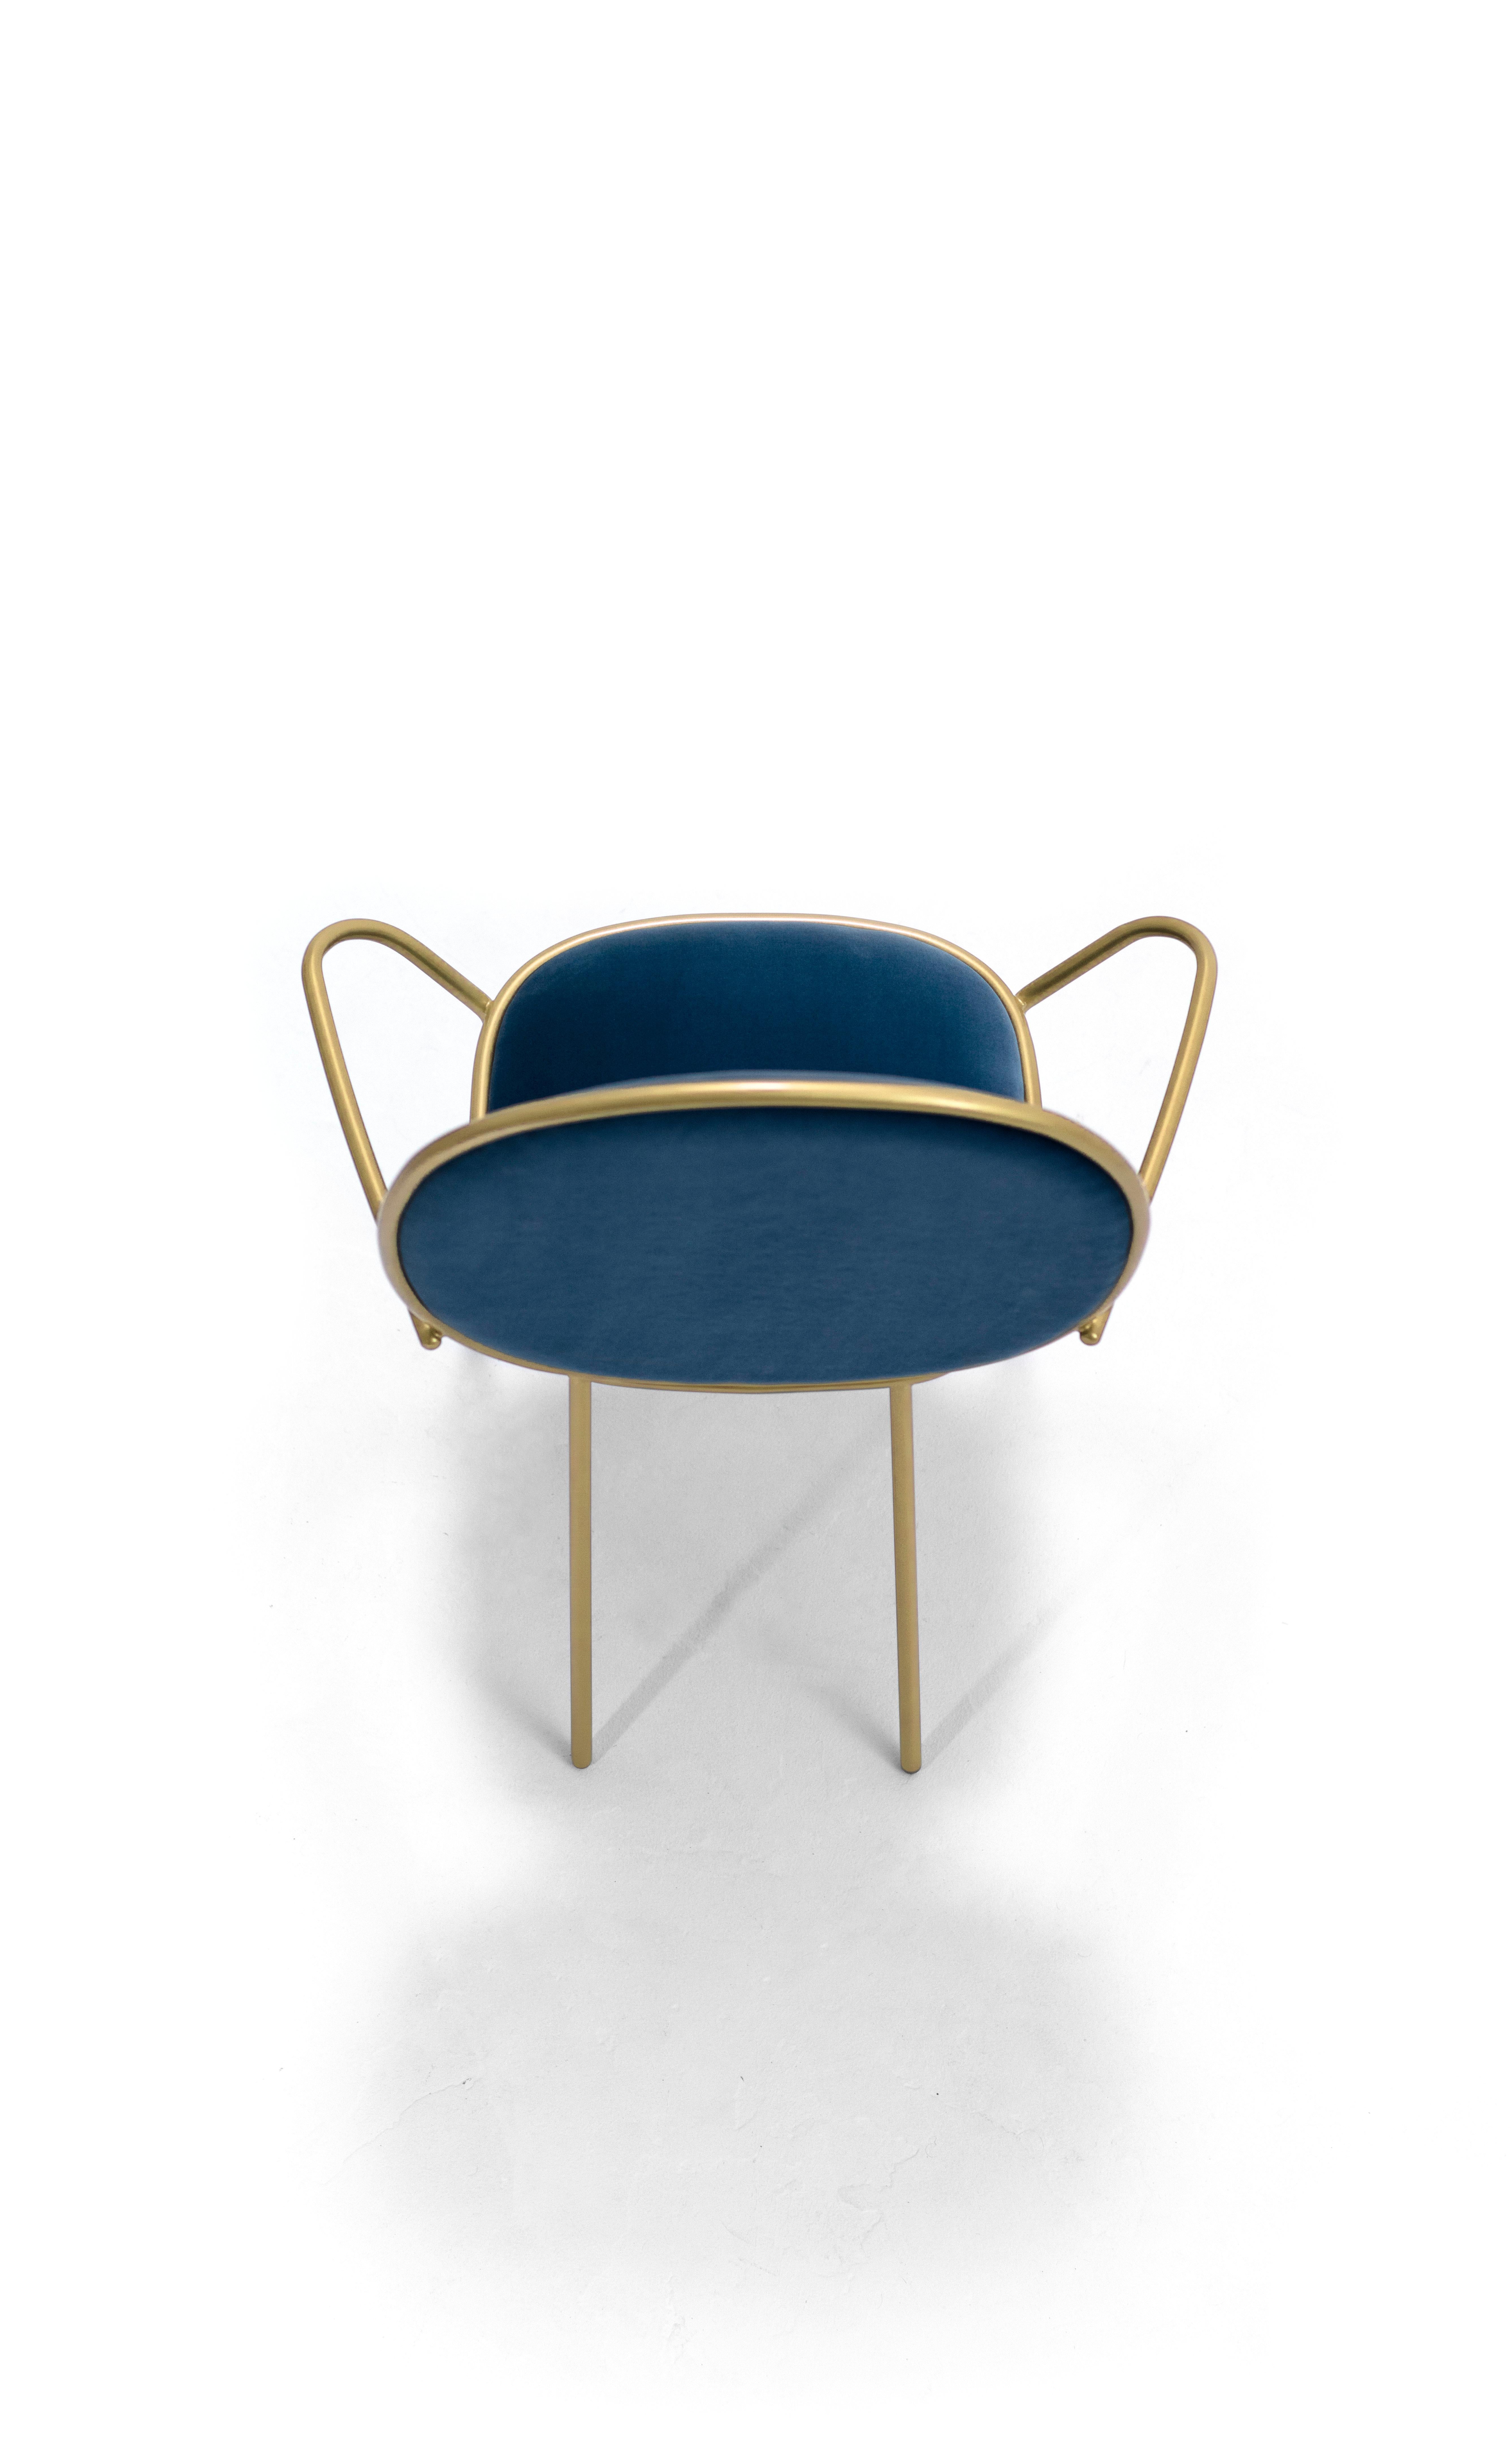 Steel Contemporary Avio Blue Velvet Upholstered Dining Armchair, Stay by Nika Zupanc For Sale